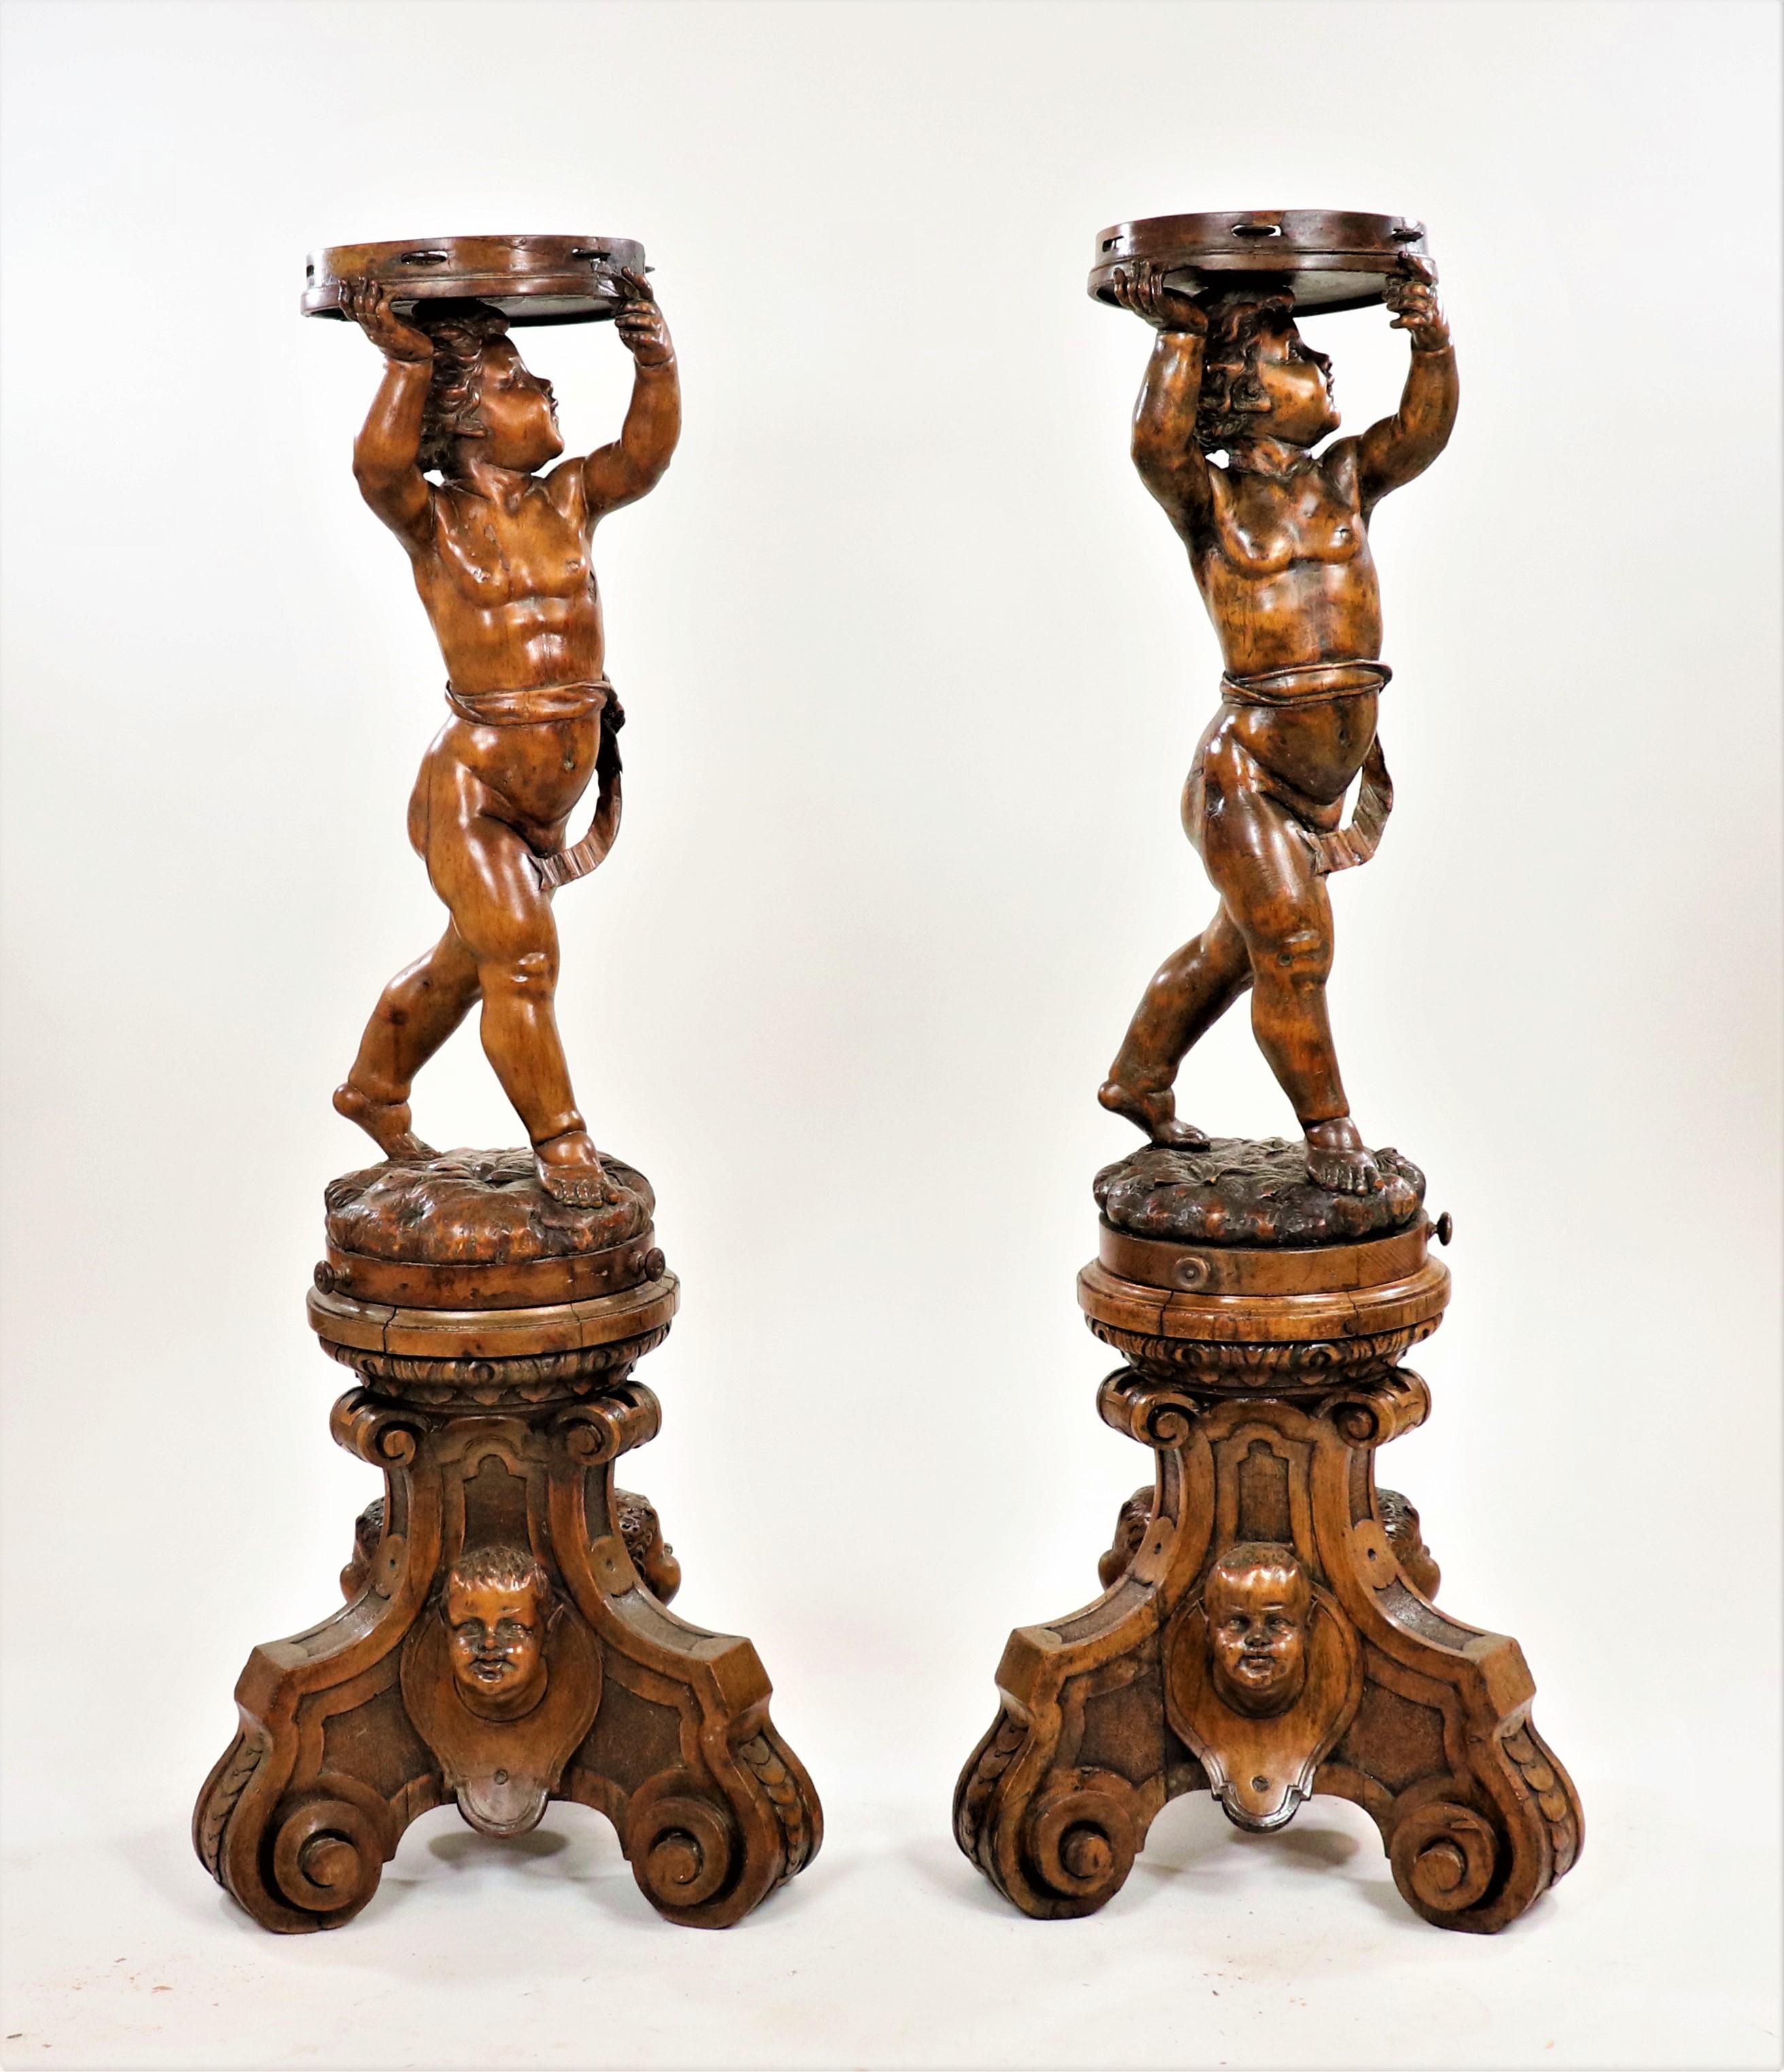 Meticulously carved from beechwood, this cherub pair recalls the iconic Renaissance style of the fifteenth and sixteenth centuries. Better recognized by their Italian name, putti—the singular putto refers to the Latin putus, meaning “boy” or